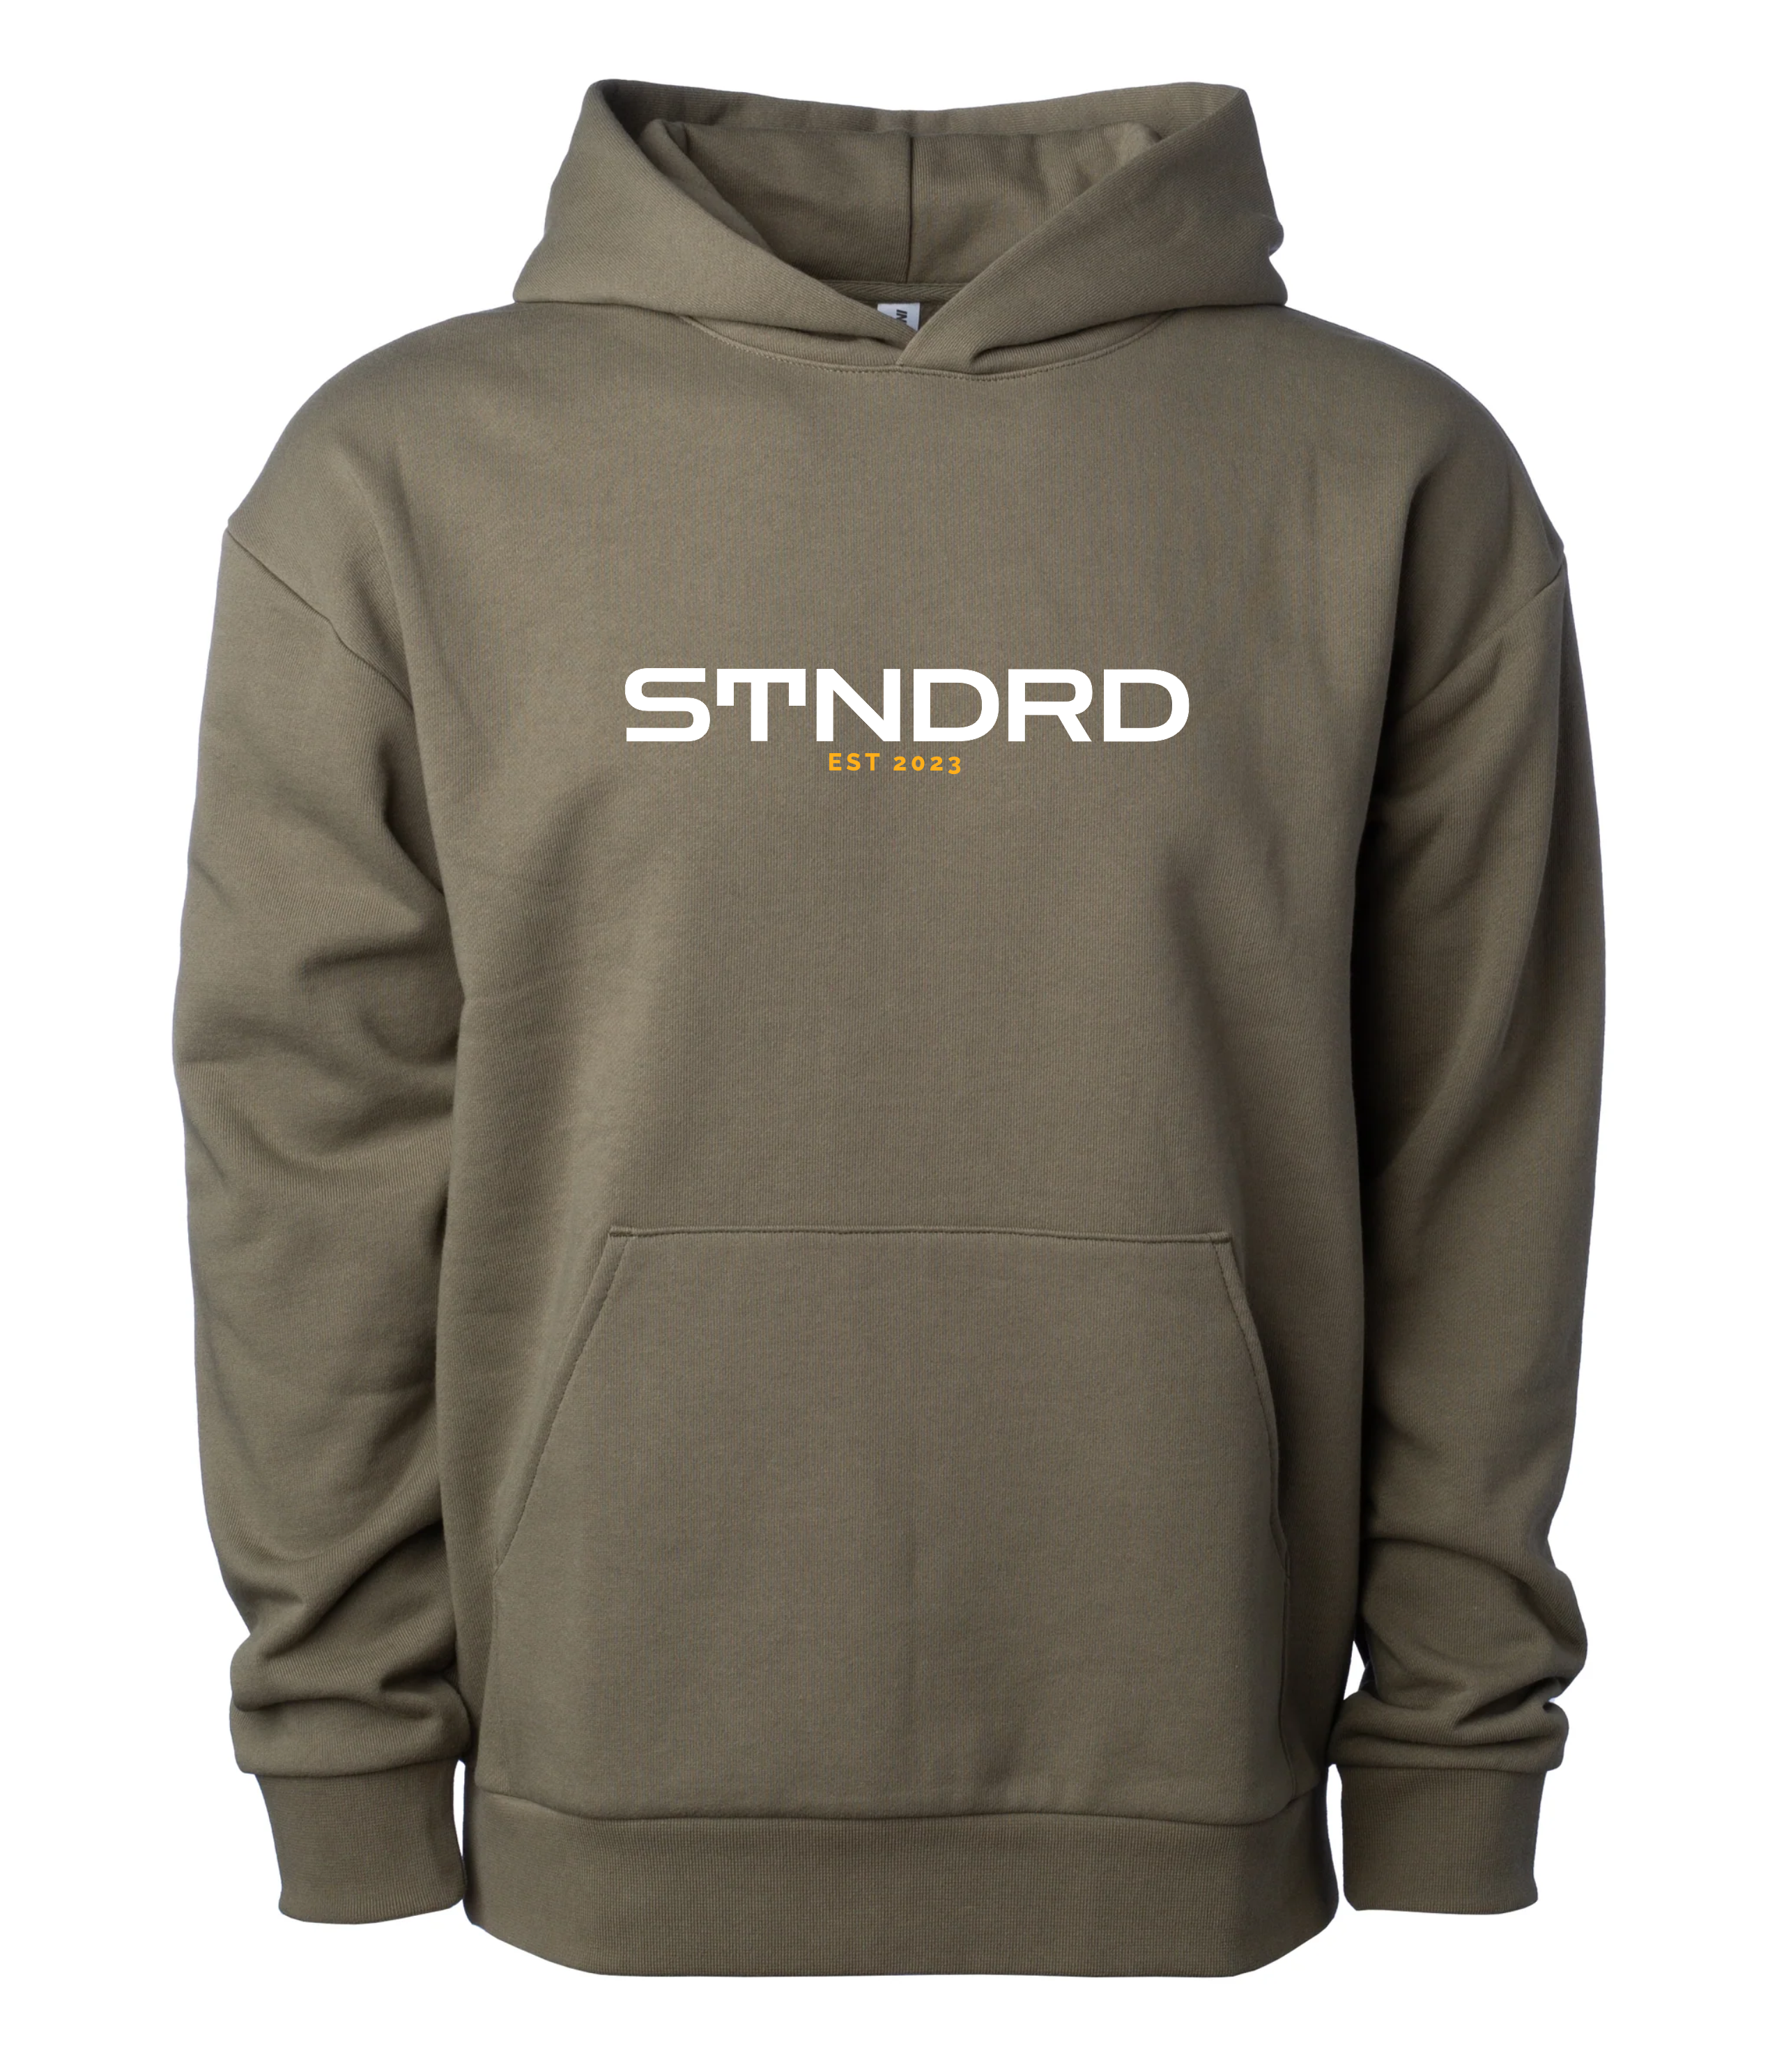 Stndrd Gear - Hoodies and Sweaters